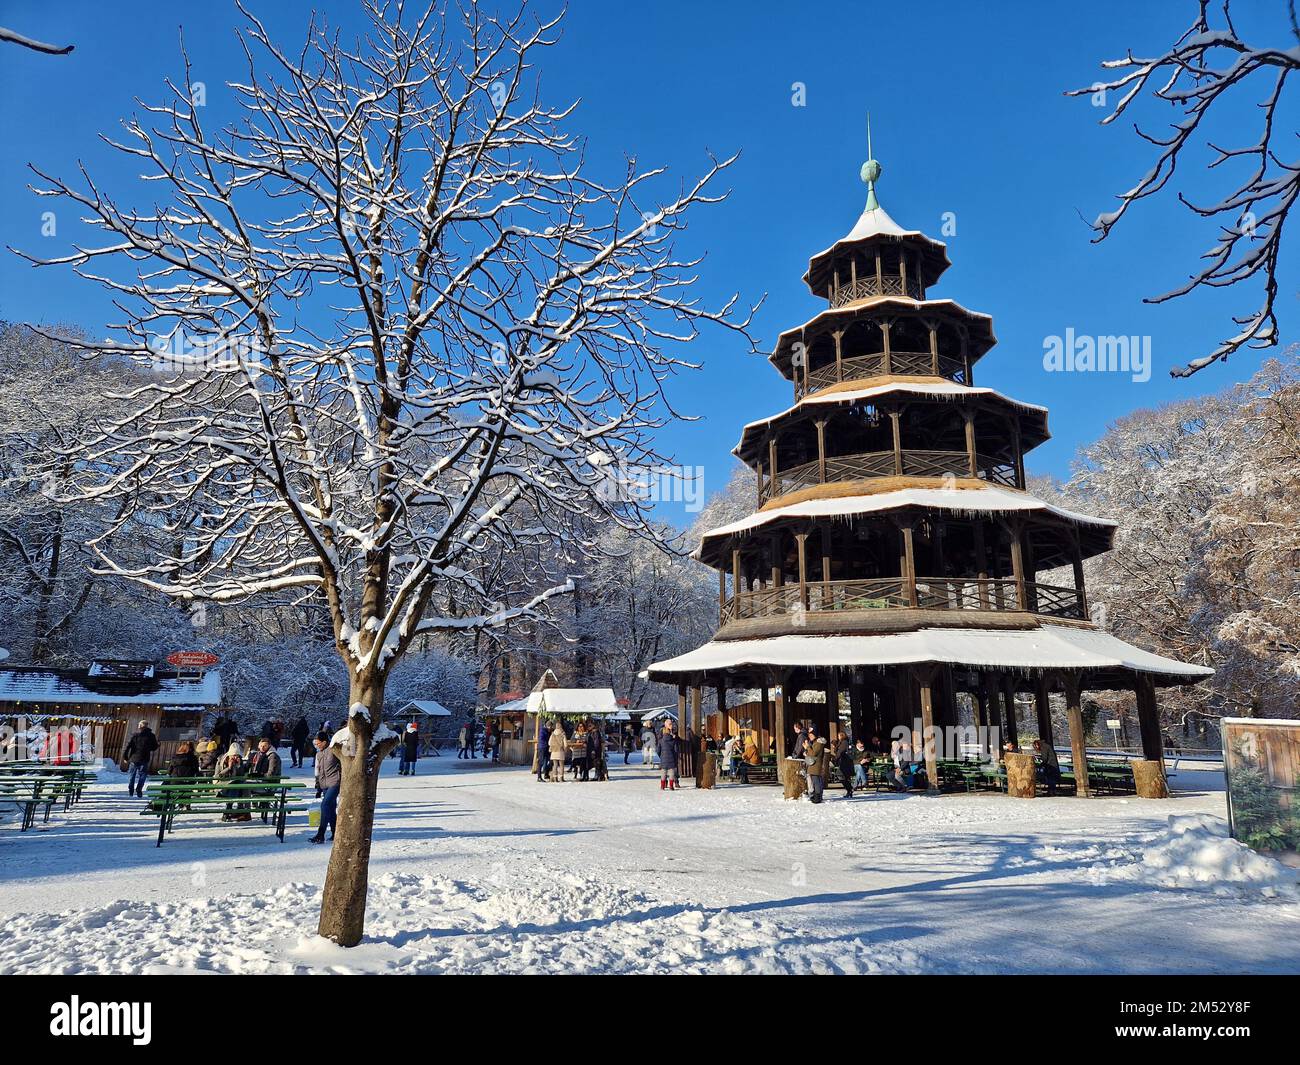 Christmas markets in the snow at Chinesischer Turm in Munich, Germany Stock Photo